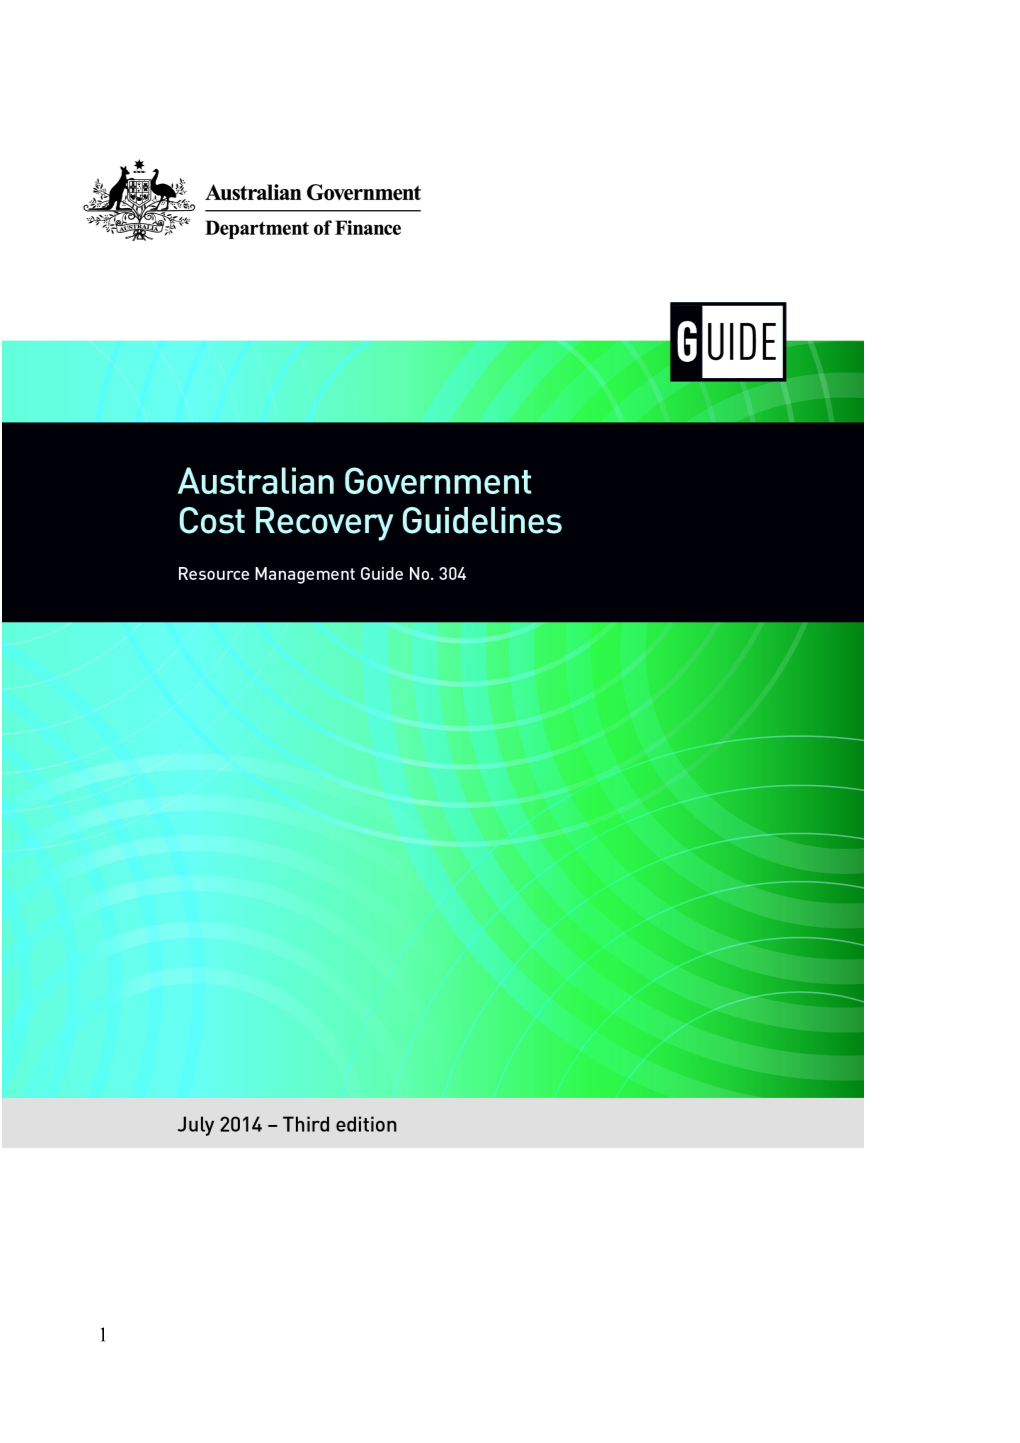 Australian Government Cost Recovery Guidelines - Resource Management Guide No. 304